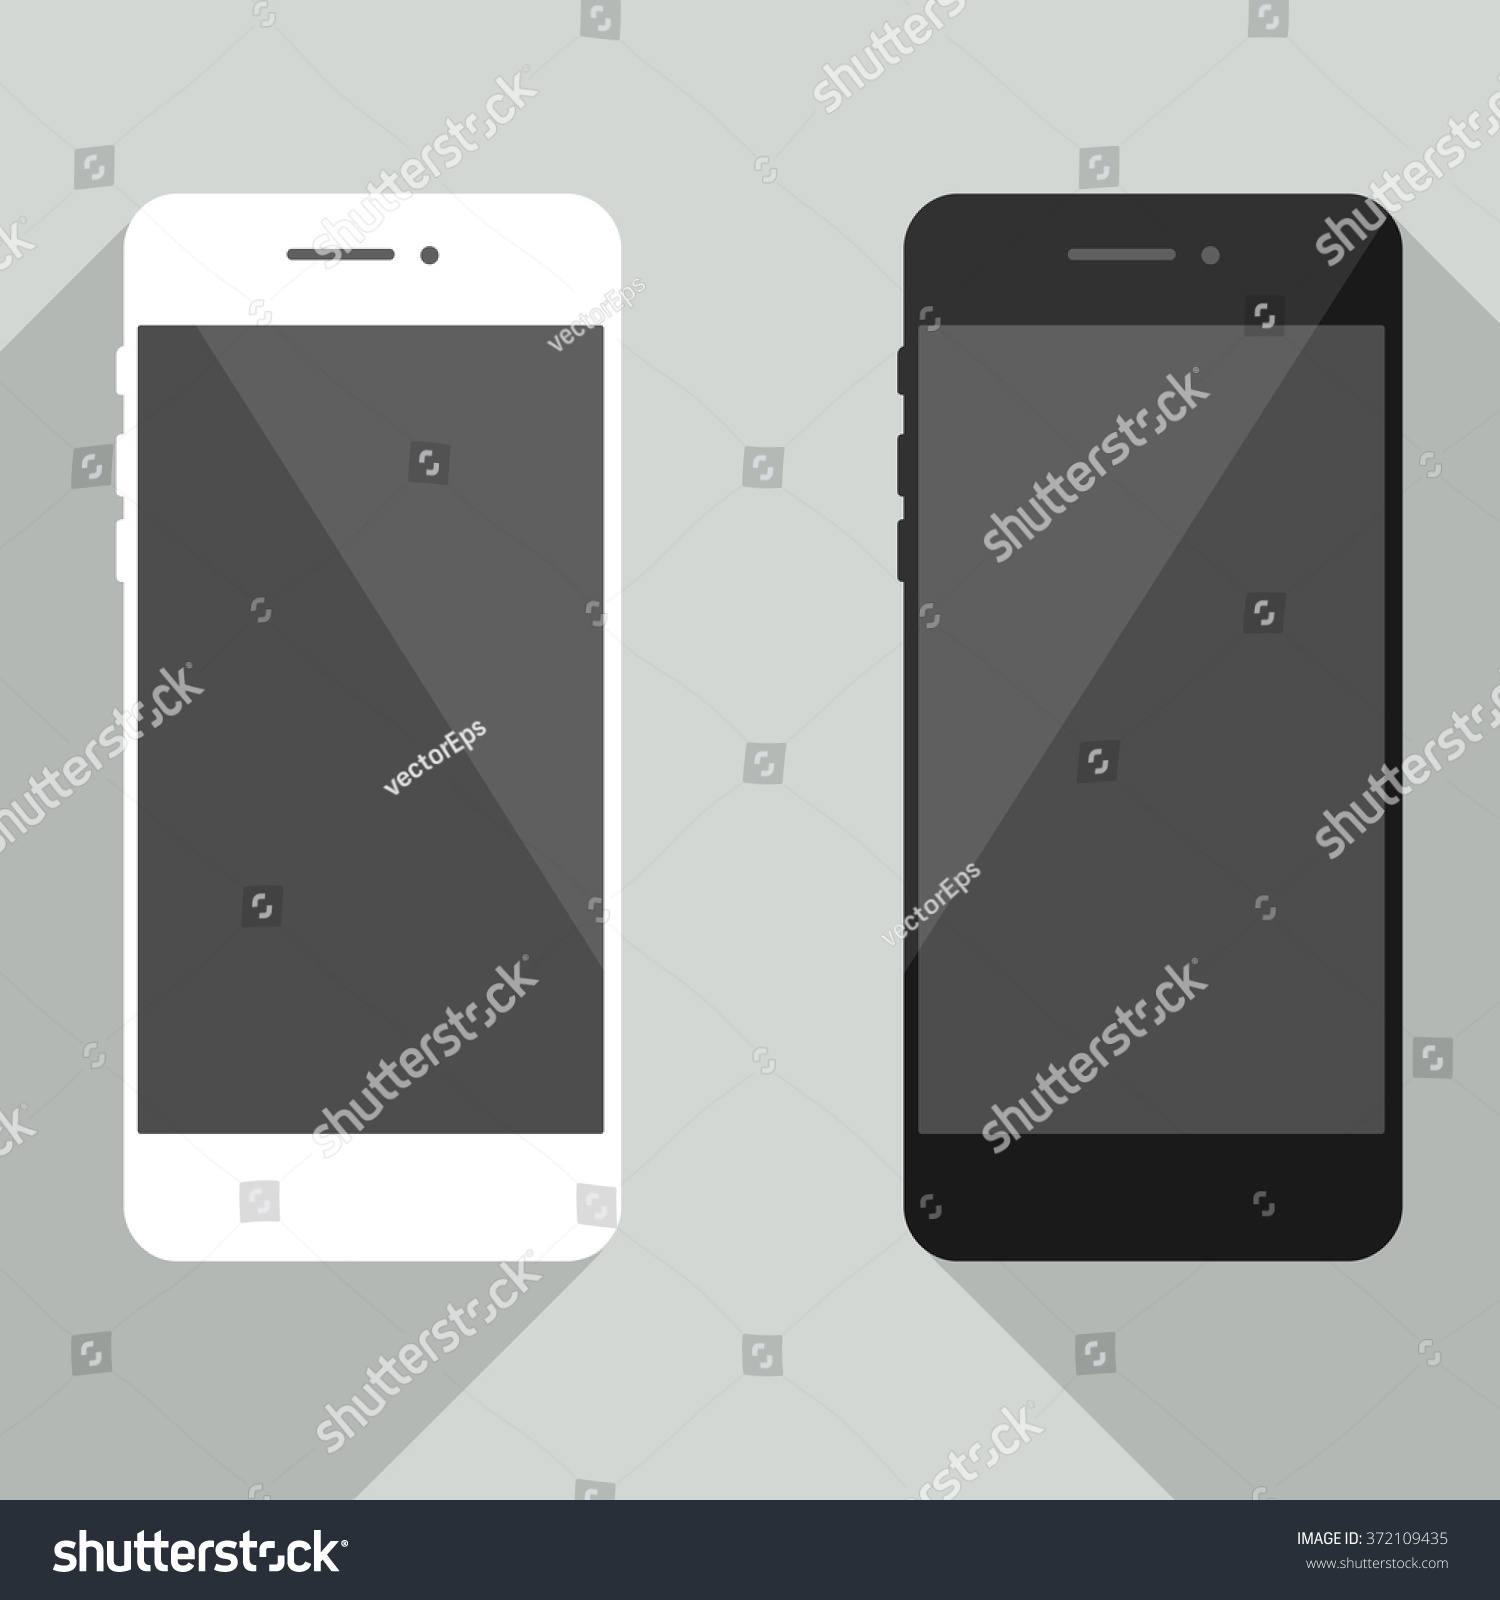 Realistic Mobile Phone Collection In New Iphone Style. White And Black ...